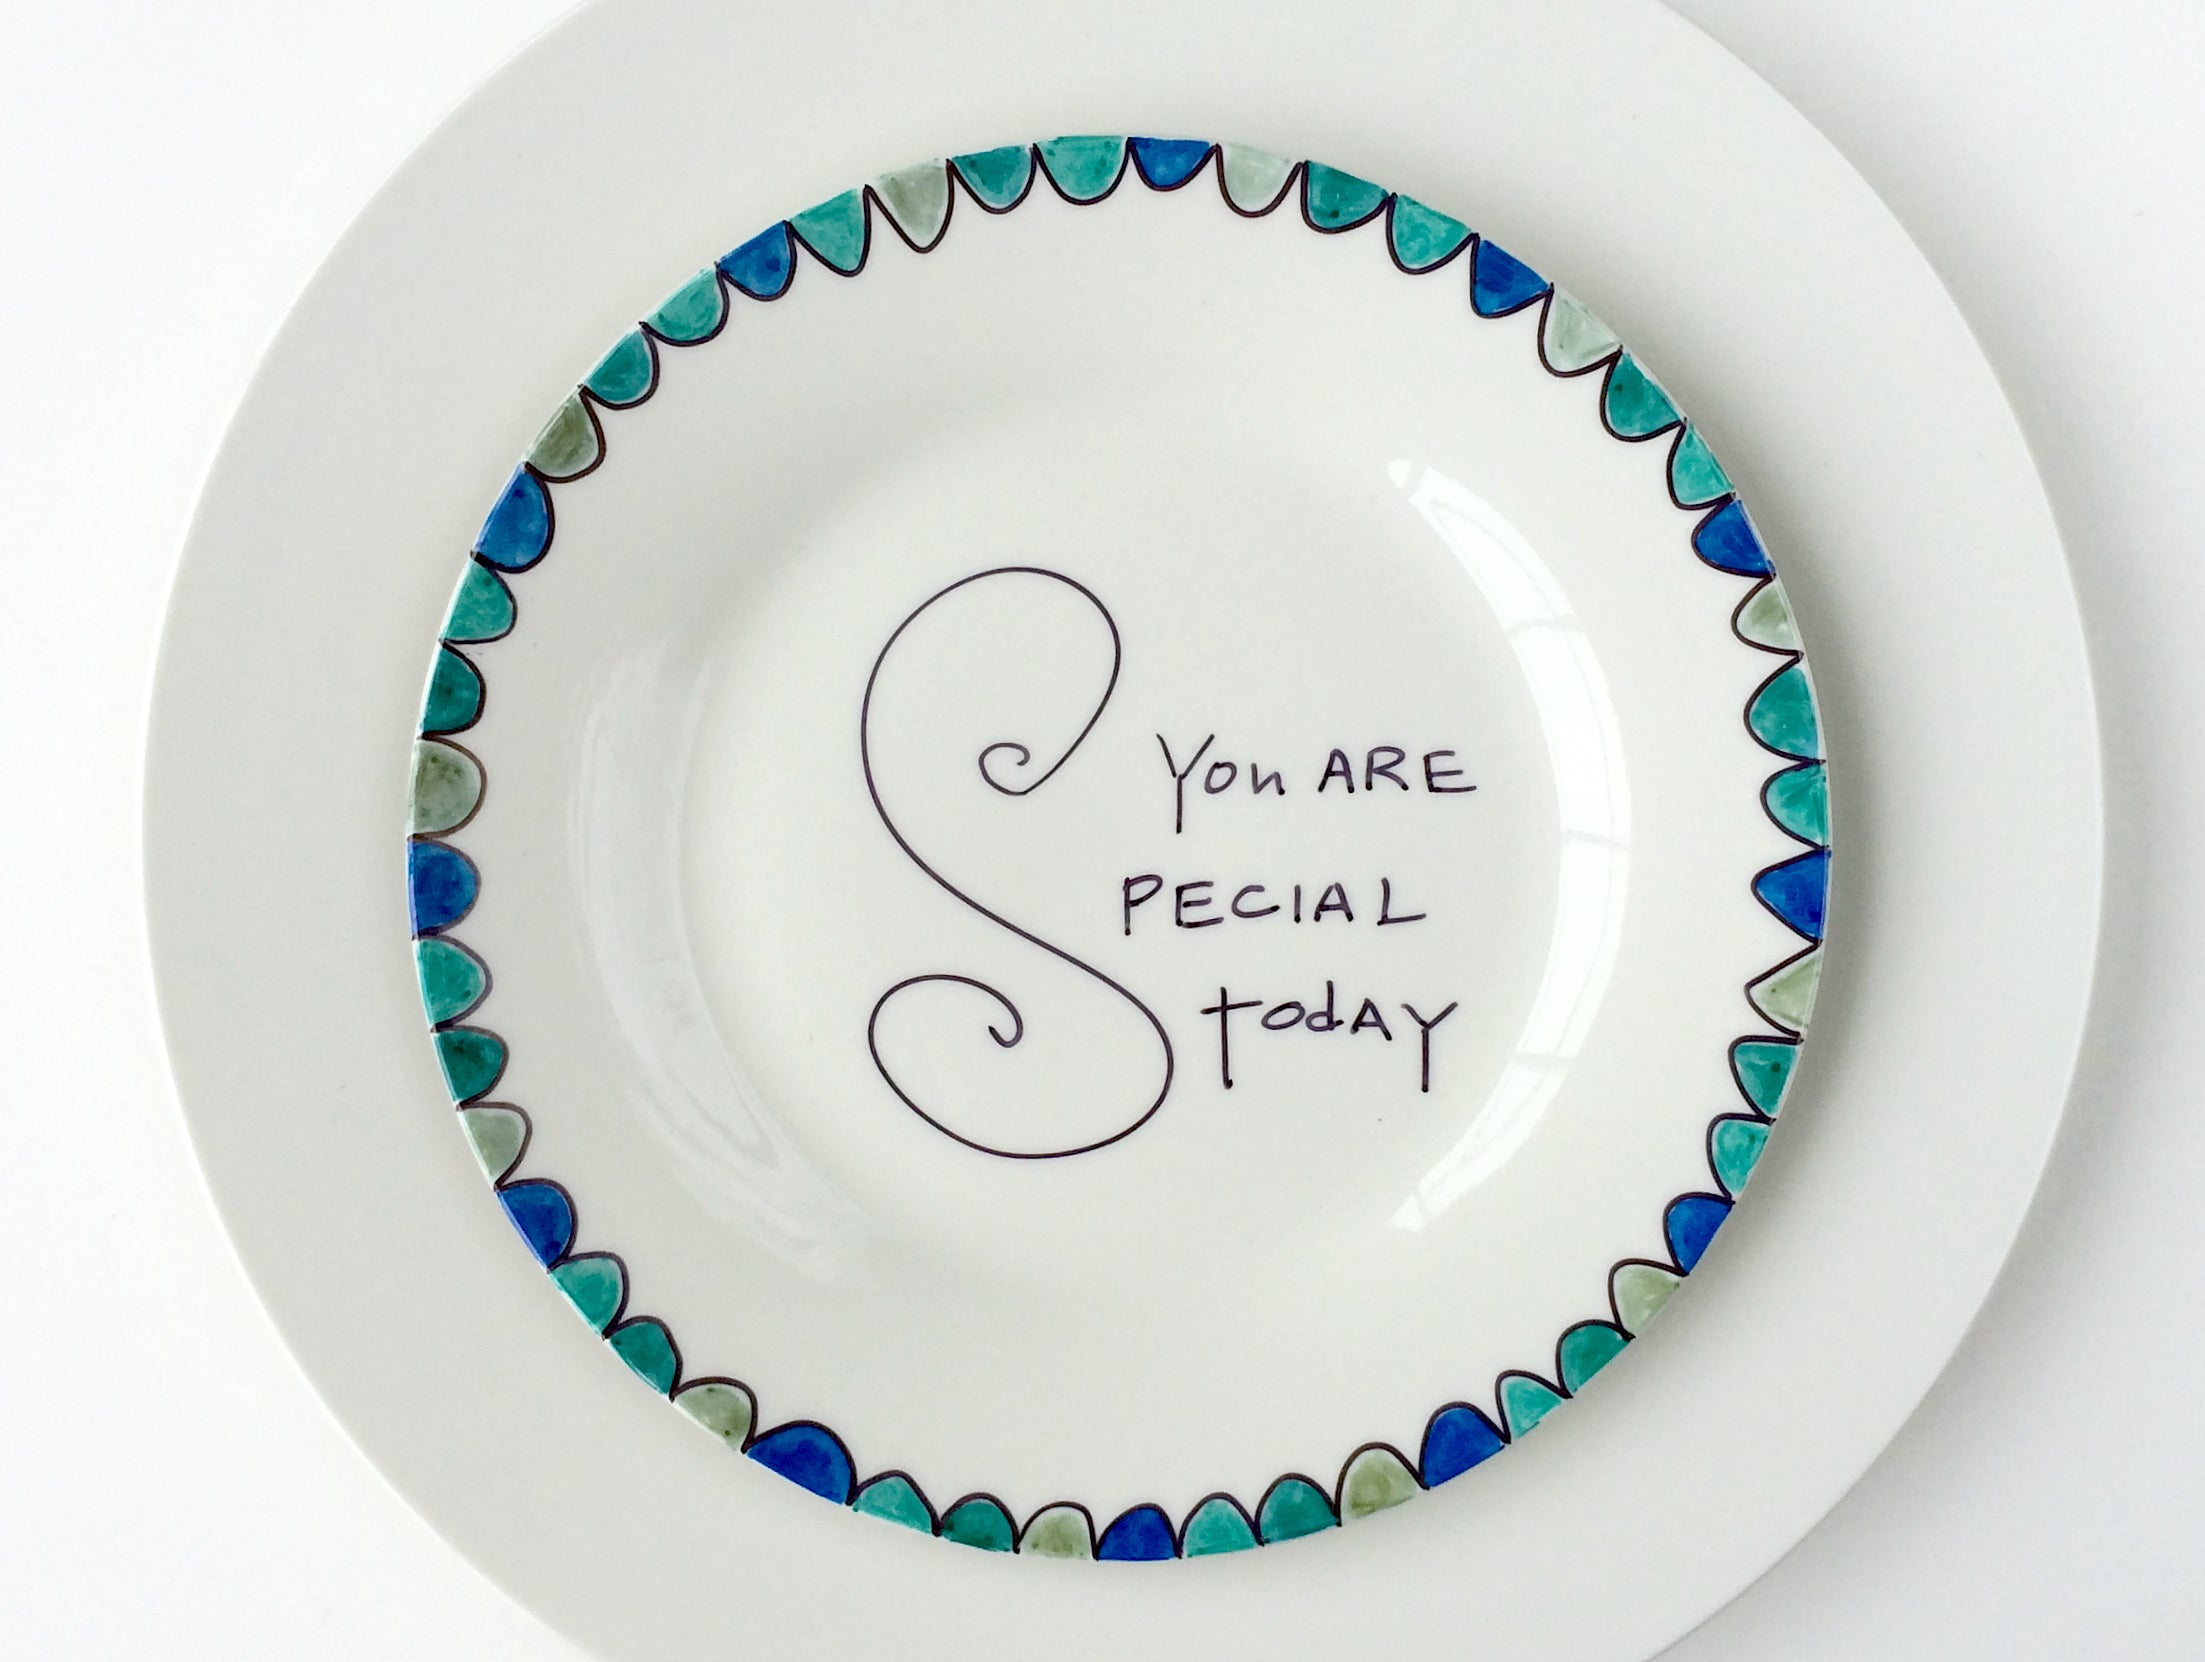 Click through to try my easy You Are Special Today plate for Father's Day gift giving | Father's Day | SatsumaDesigns.com #fathersday #giftsforhim